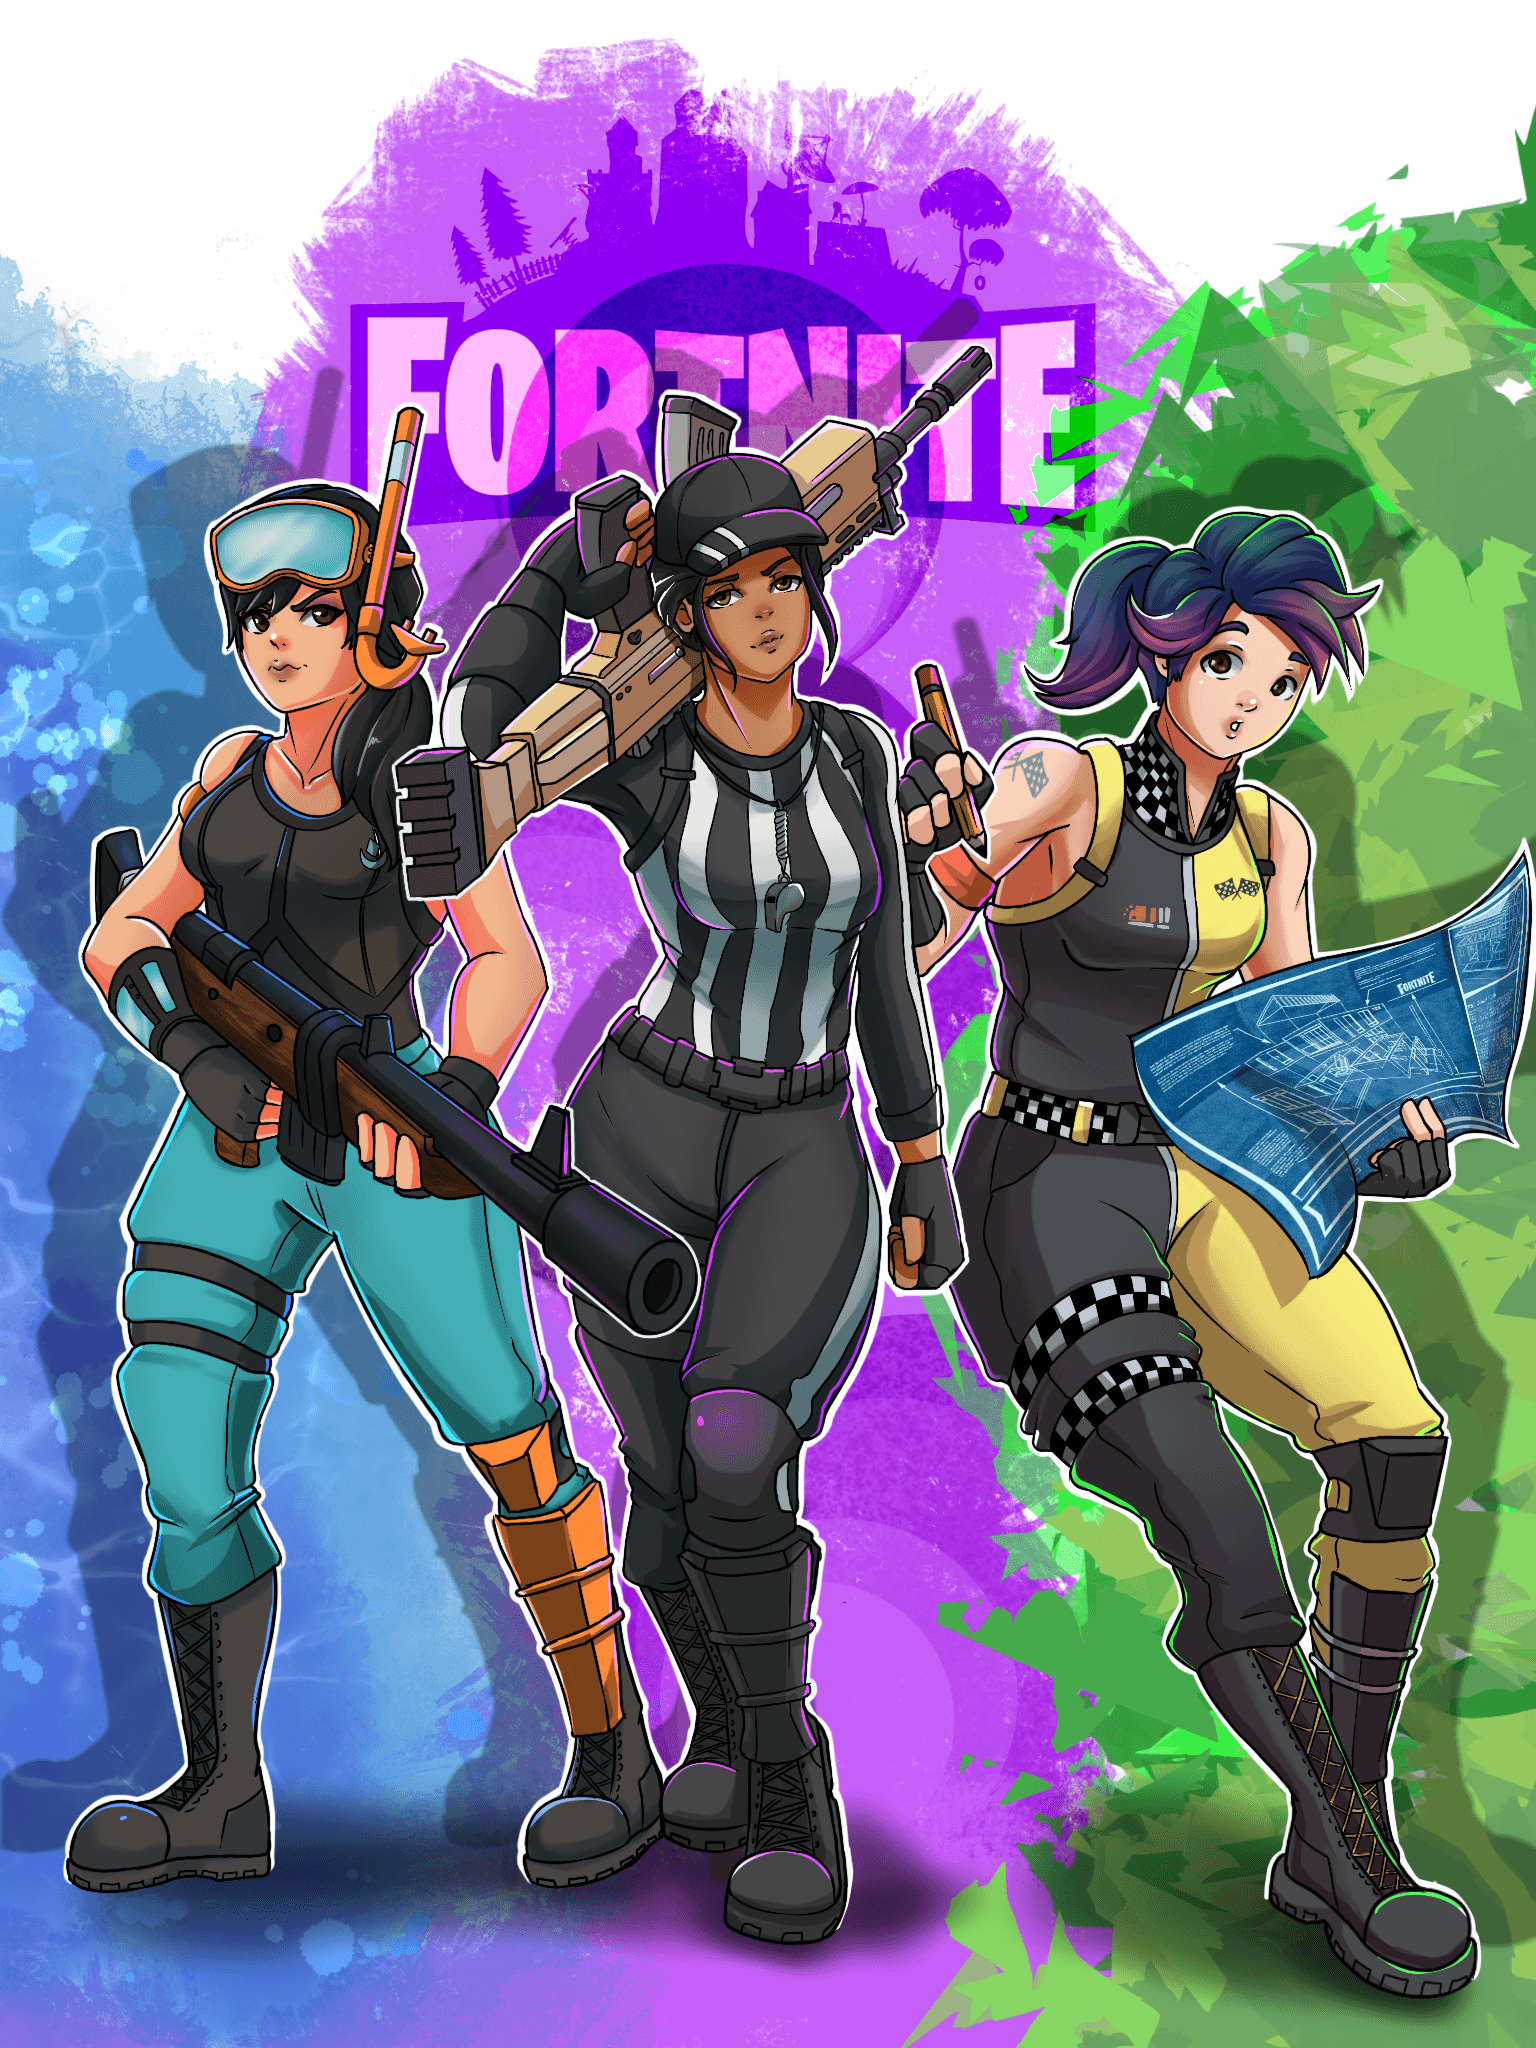 Fortnite commission I finished a couple weeks ago for a Christmas